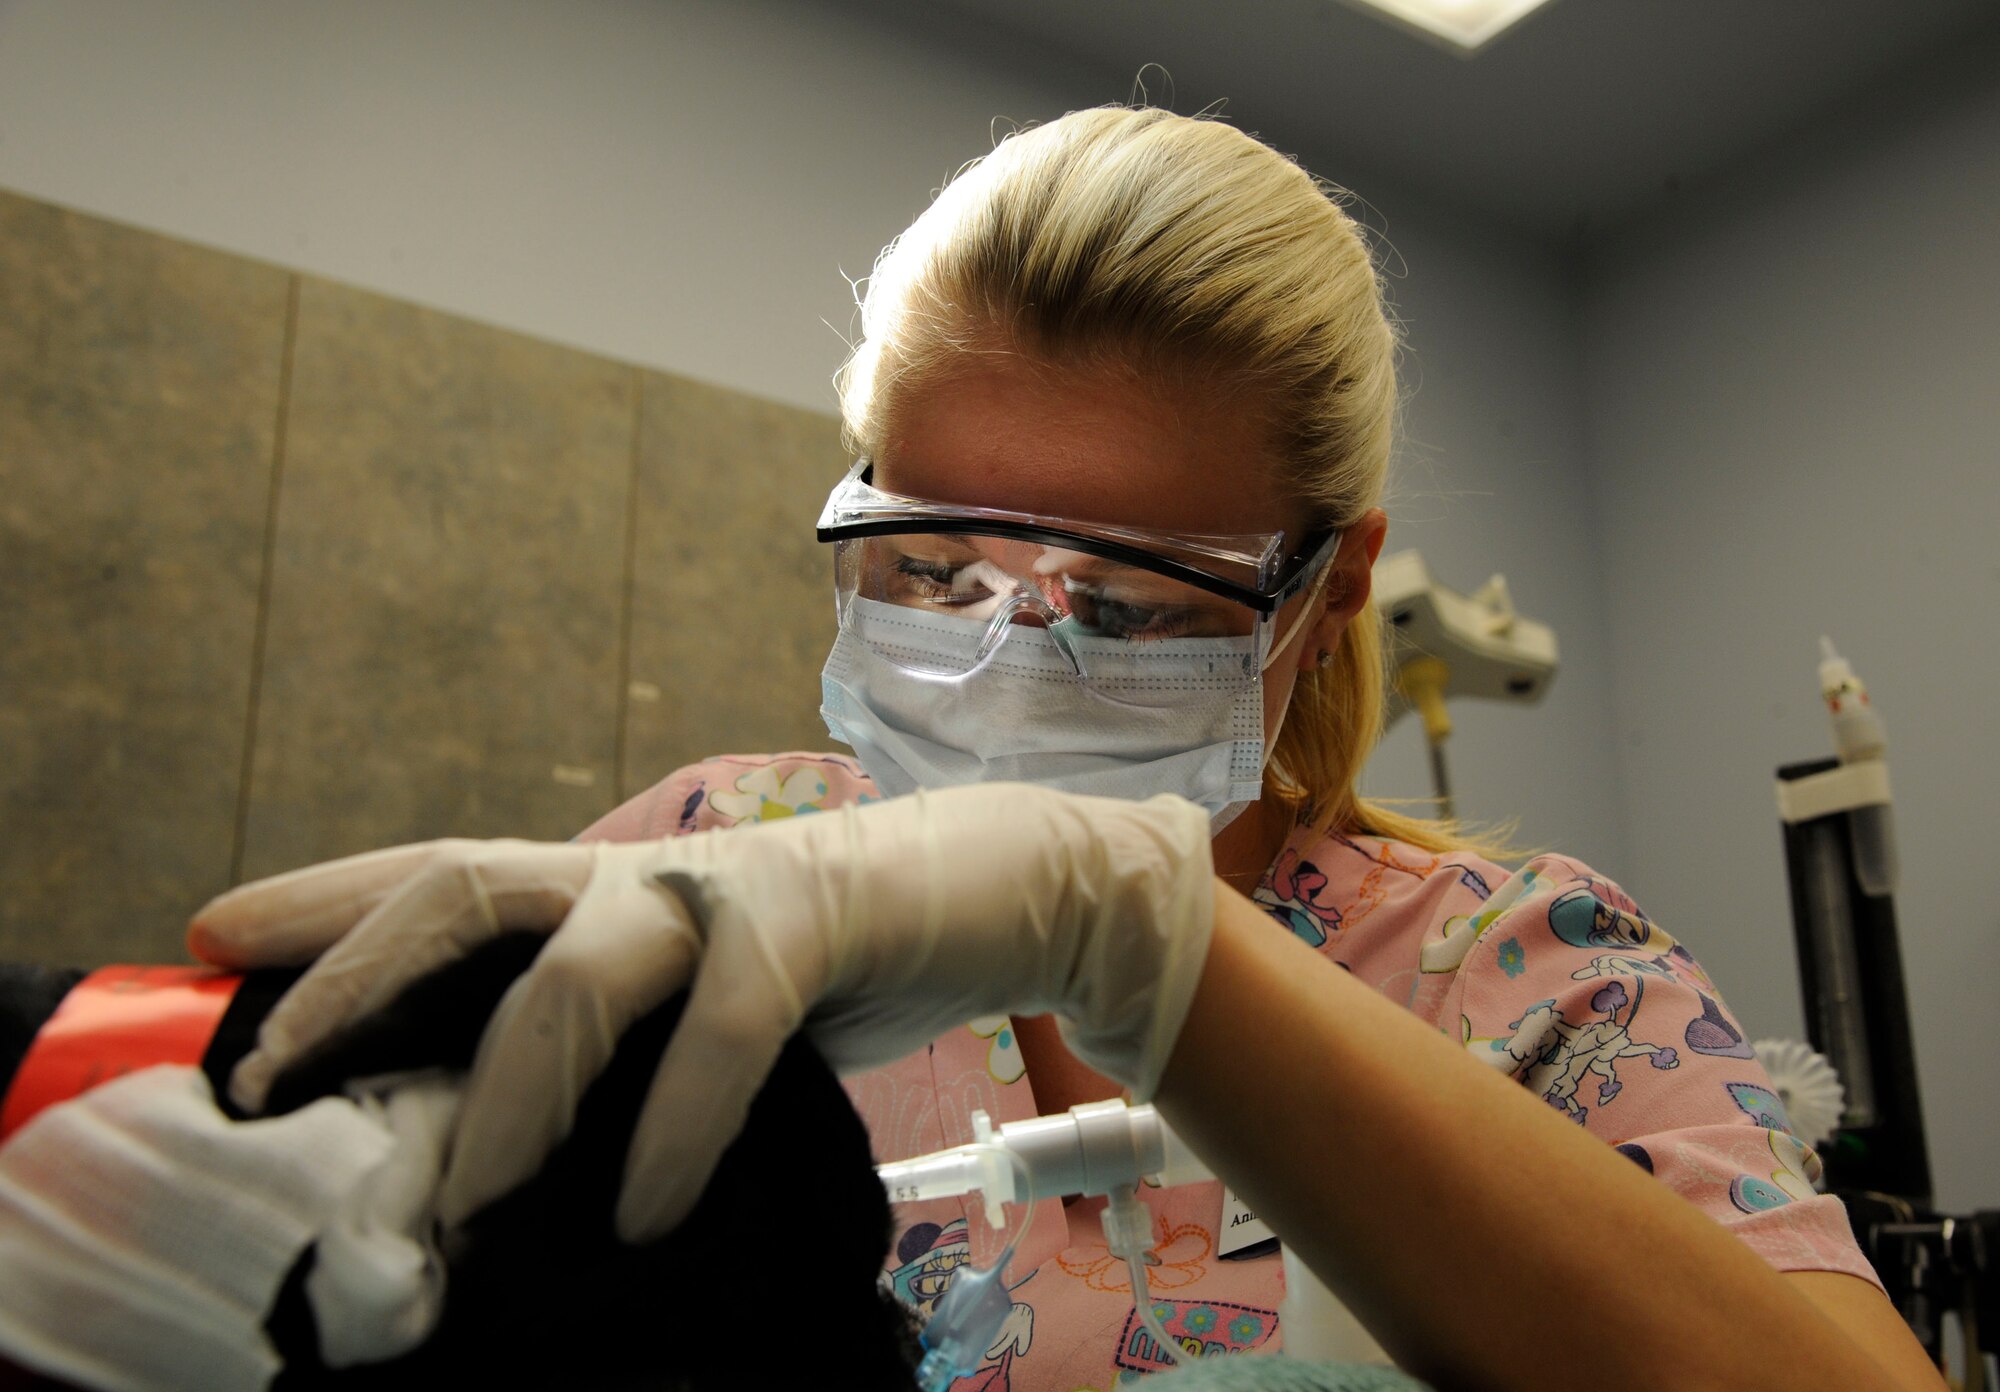 Megan Weddle, registered veterinary technician, cleans a dog's teeth on Barksdale Air Force Base, La., May 2, 2013. The base vet clinic provides services to Military Working Dogs and Team Barksdale's pets, ranging from check-ups, dental work and surgery. (U.S. Air Force photo/Airman 1st Class Andrew Moua)